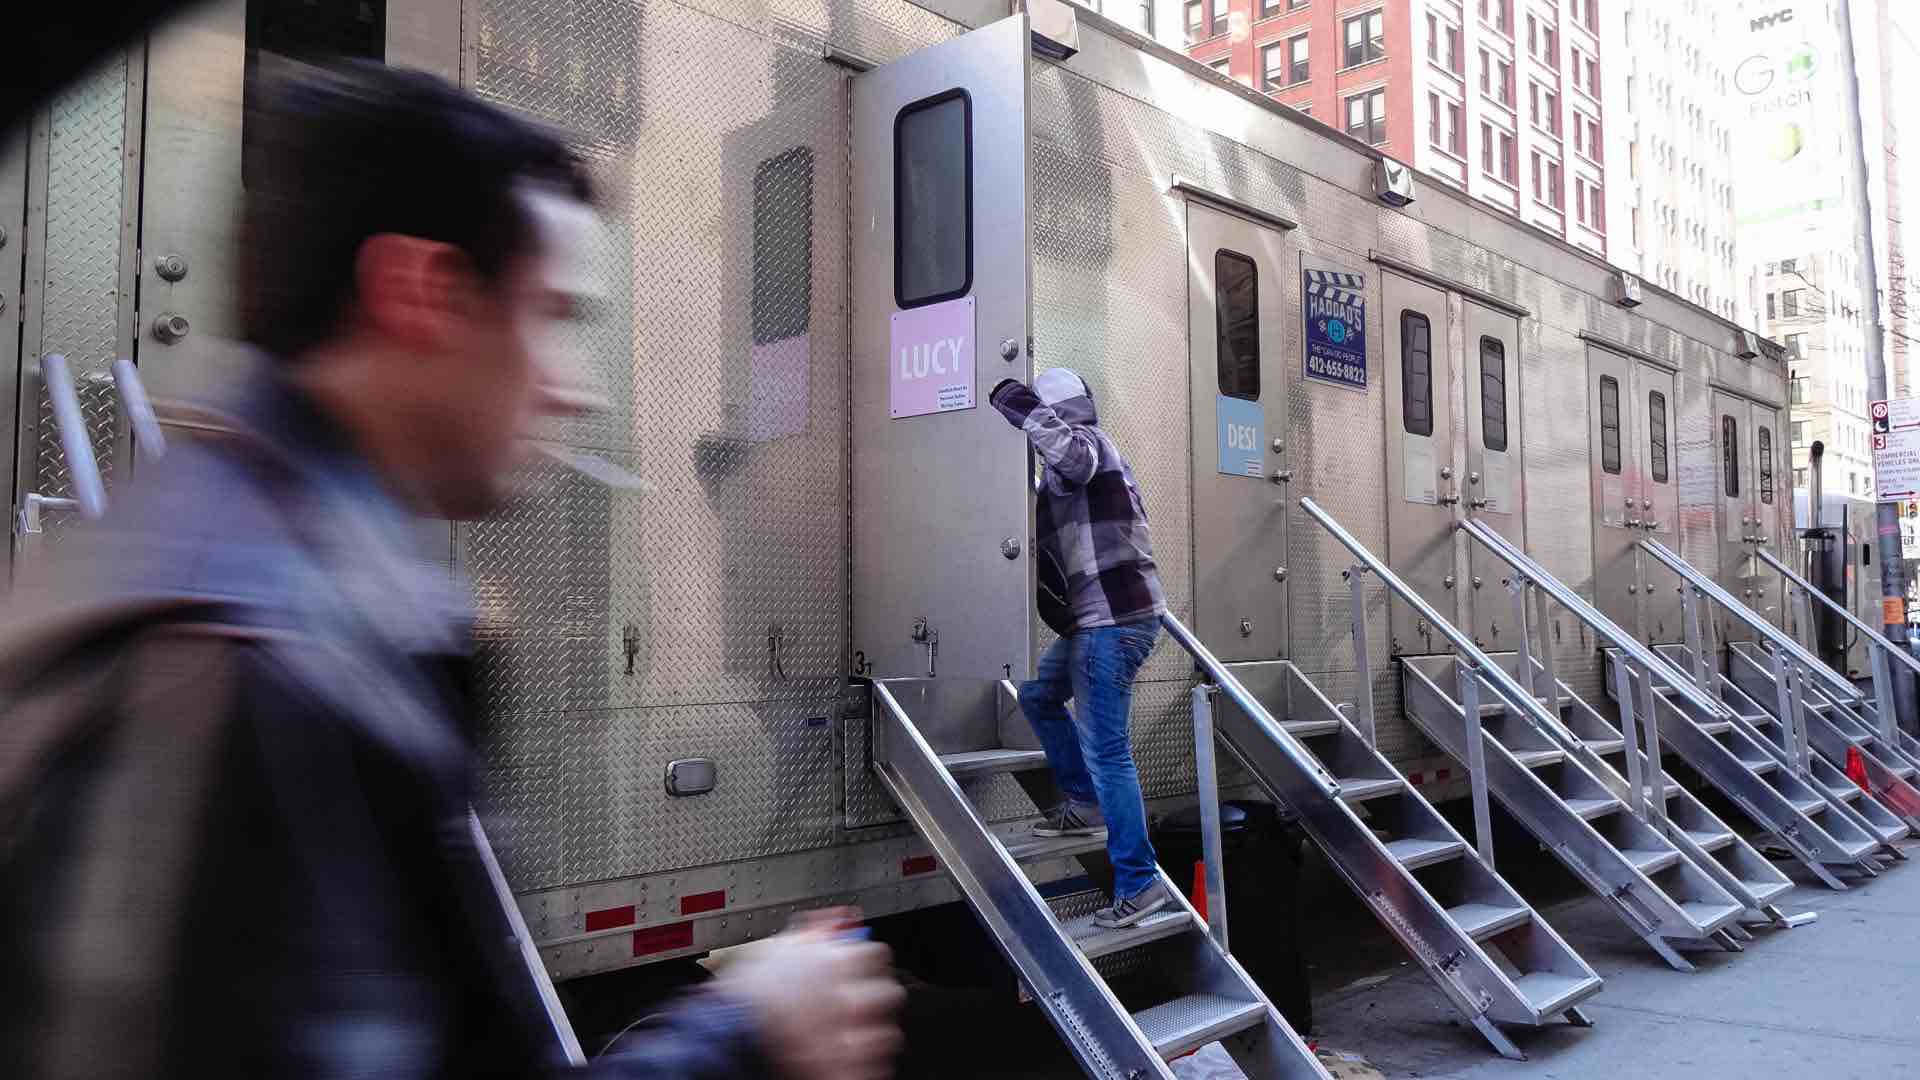 A staffer enters a silver movie trailer parked on a NYC block.